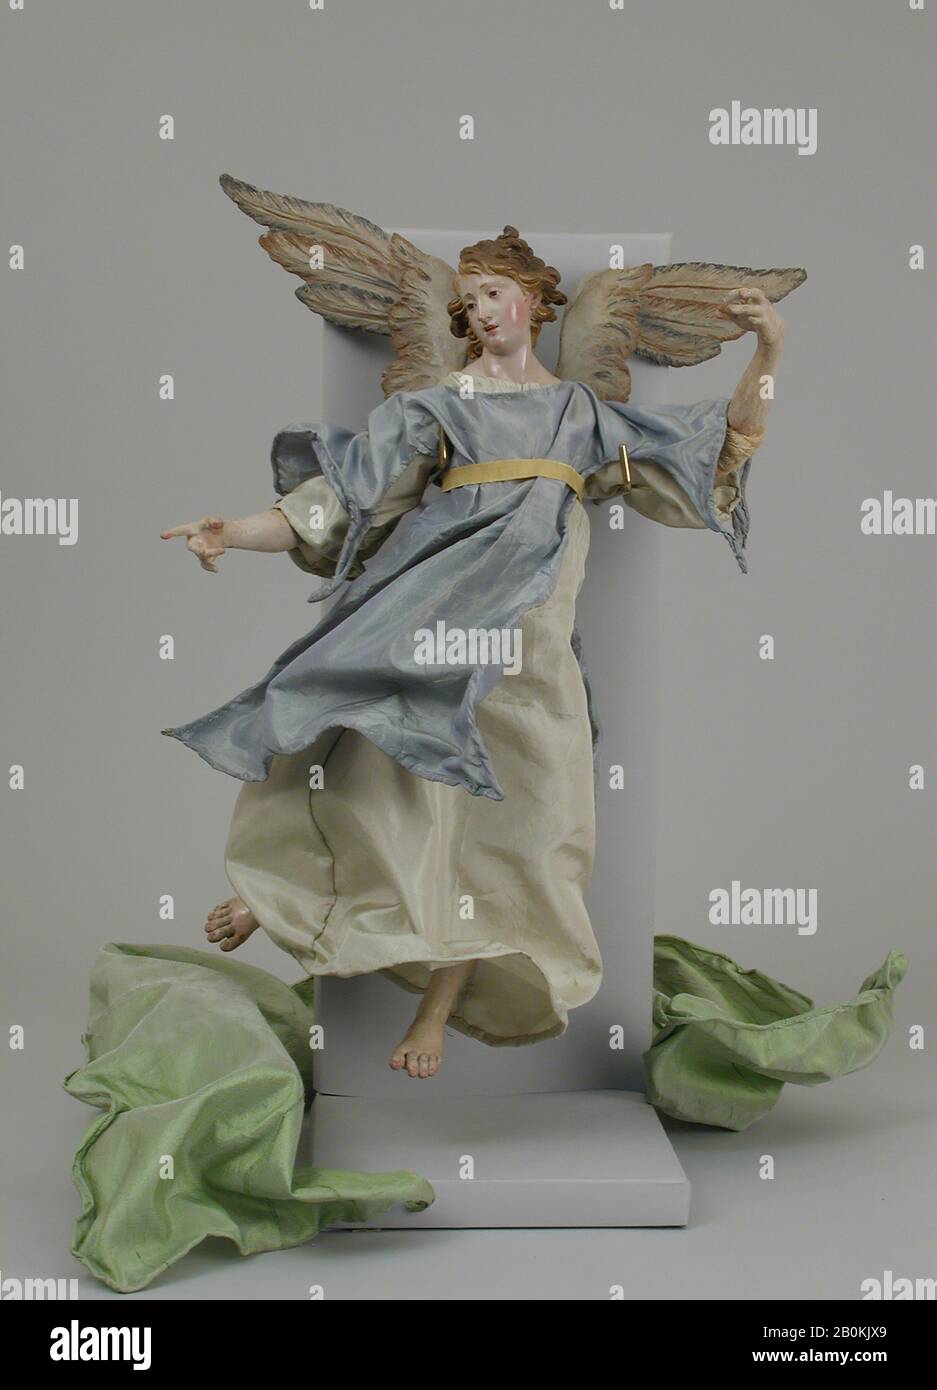 Angel, Italian, Naples, late 18th–early 19th century, Italian, Naples, Polychromed wood and terracotta, straw, cloth and silk, H. 13 3/4 in. (34.9 cm.), Crèche Stock Photo